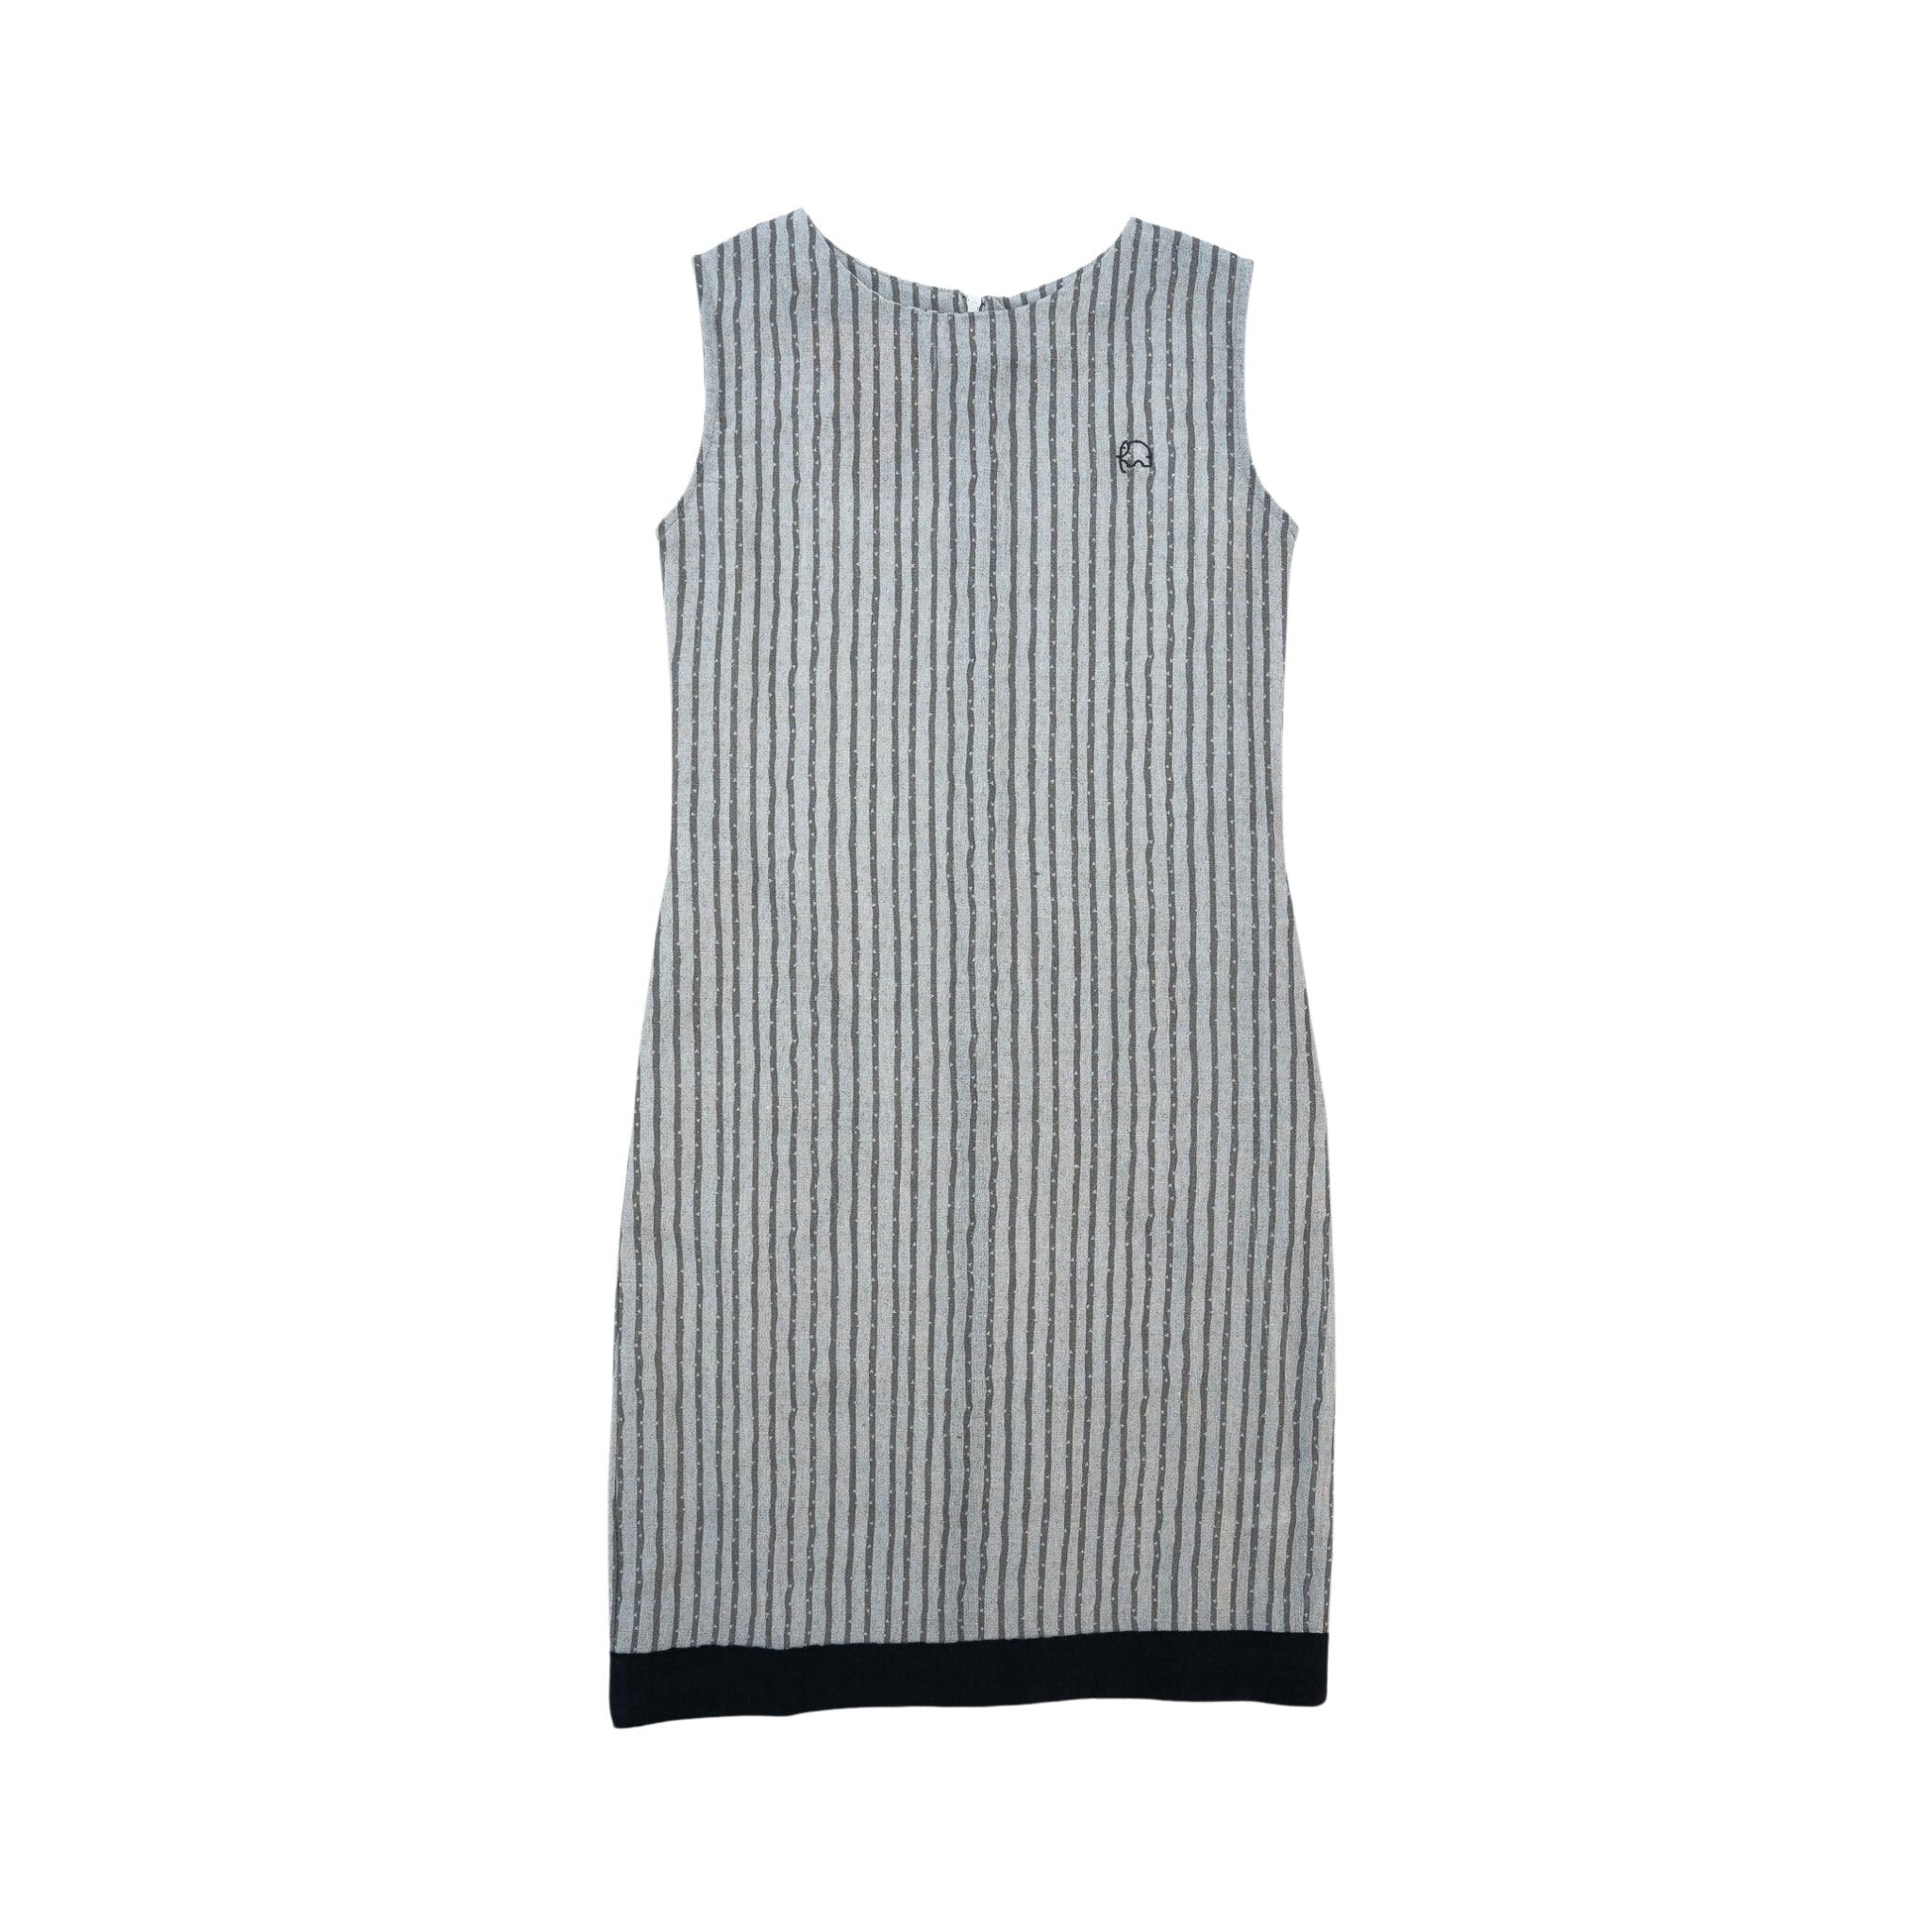 Sleeveless, Karee linen cotton round neck frock for kids in steel grey with contrasting black hem, displayed on a plain white background.